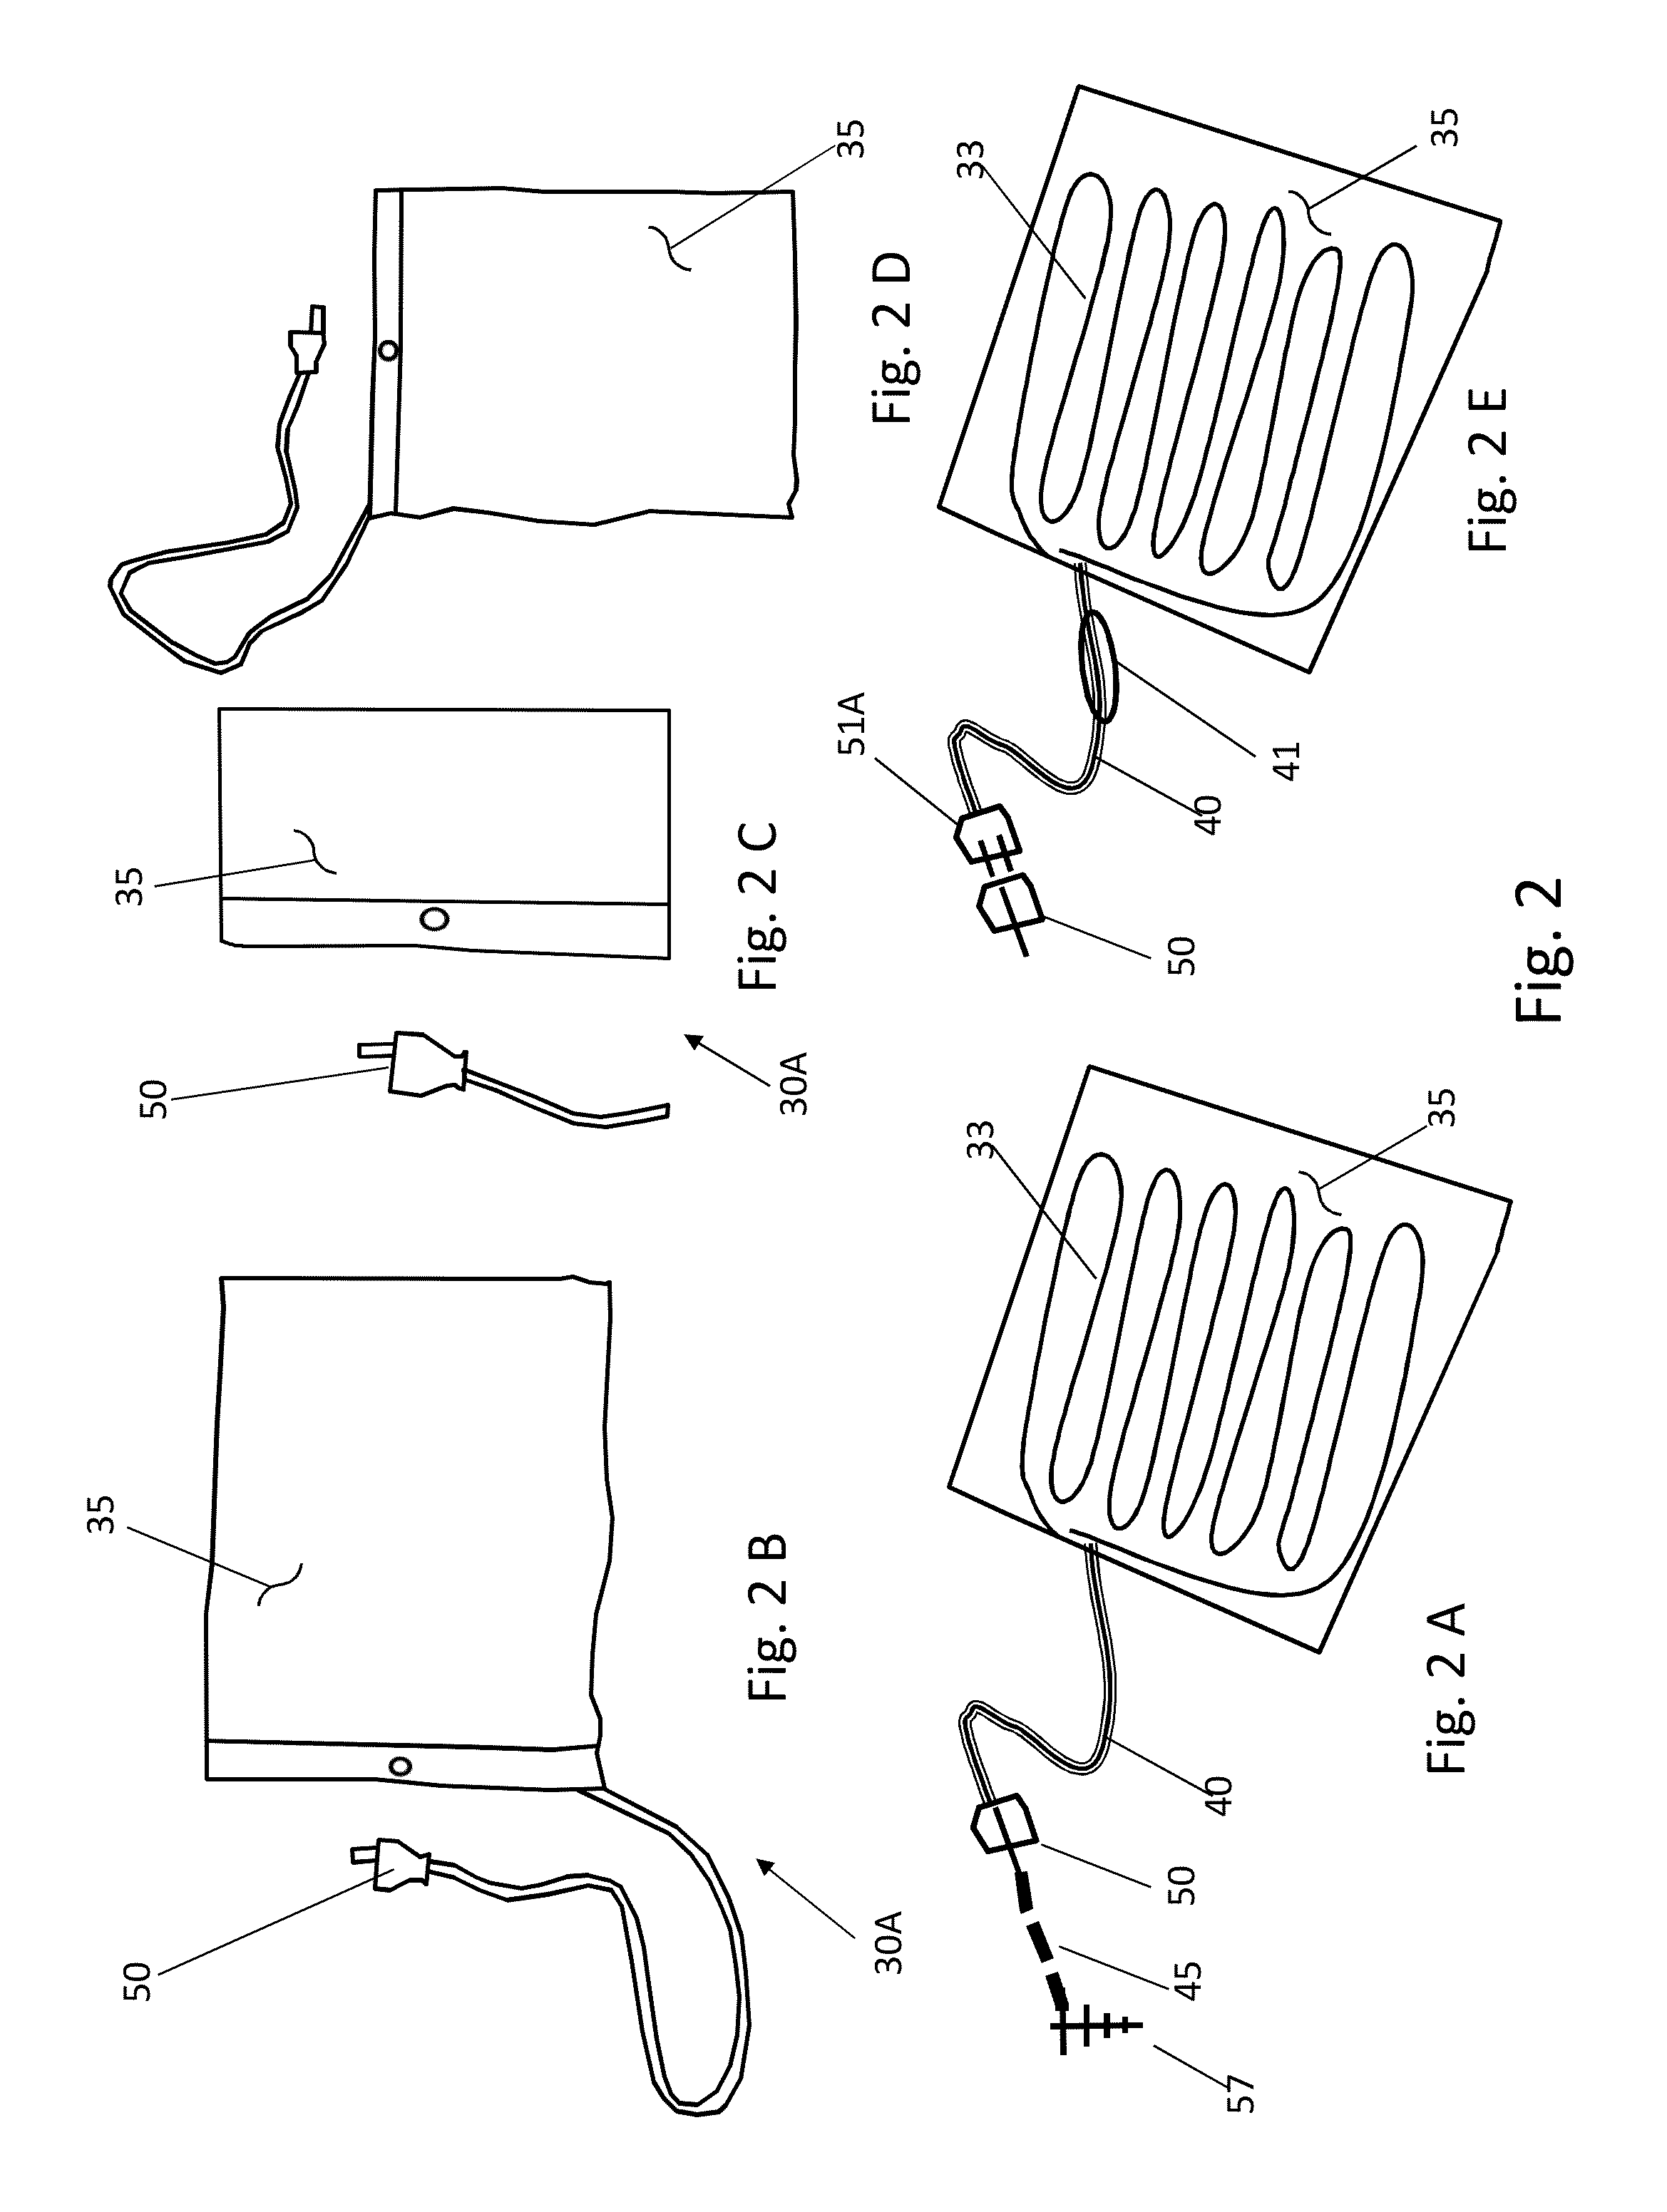 Personal grounding device or method to ground for a human being